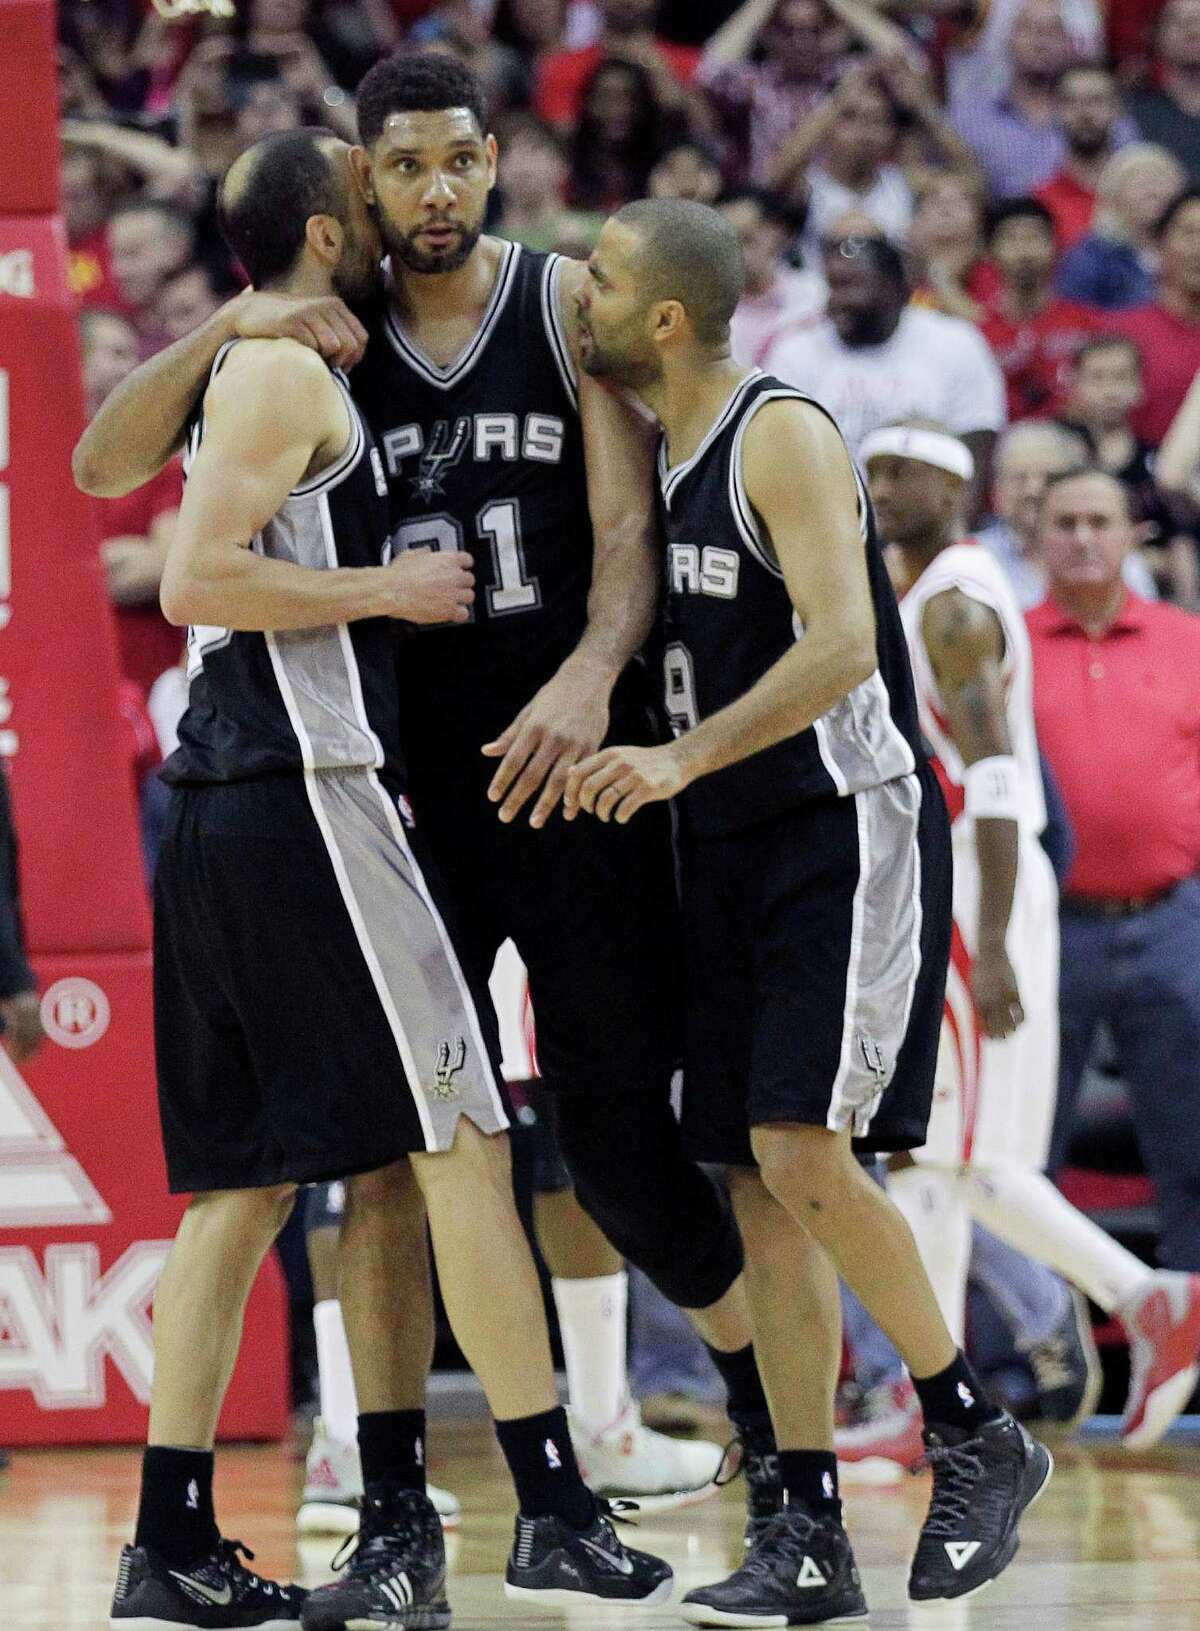 San Antonio Spurs forward Tim Duncan (center) receives a hug from Manu Ginobili (left) and Tony Parker after Duncan blocked a layup attempt by Houston Rockets guard James Harden at the buzzer during the second half on April 10, 2015, in Houston.